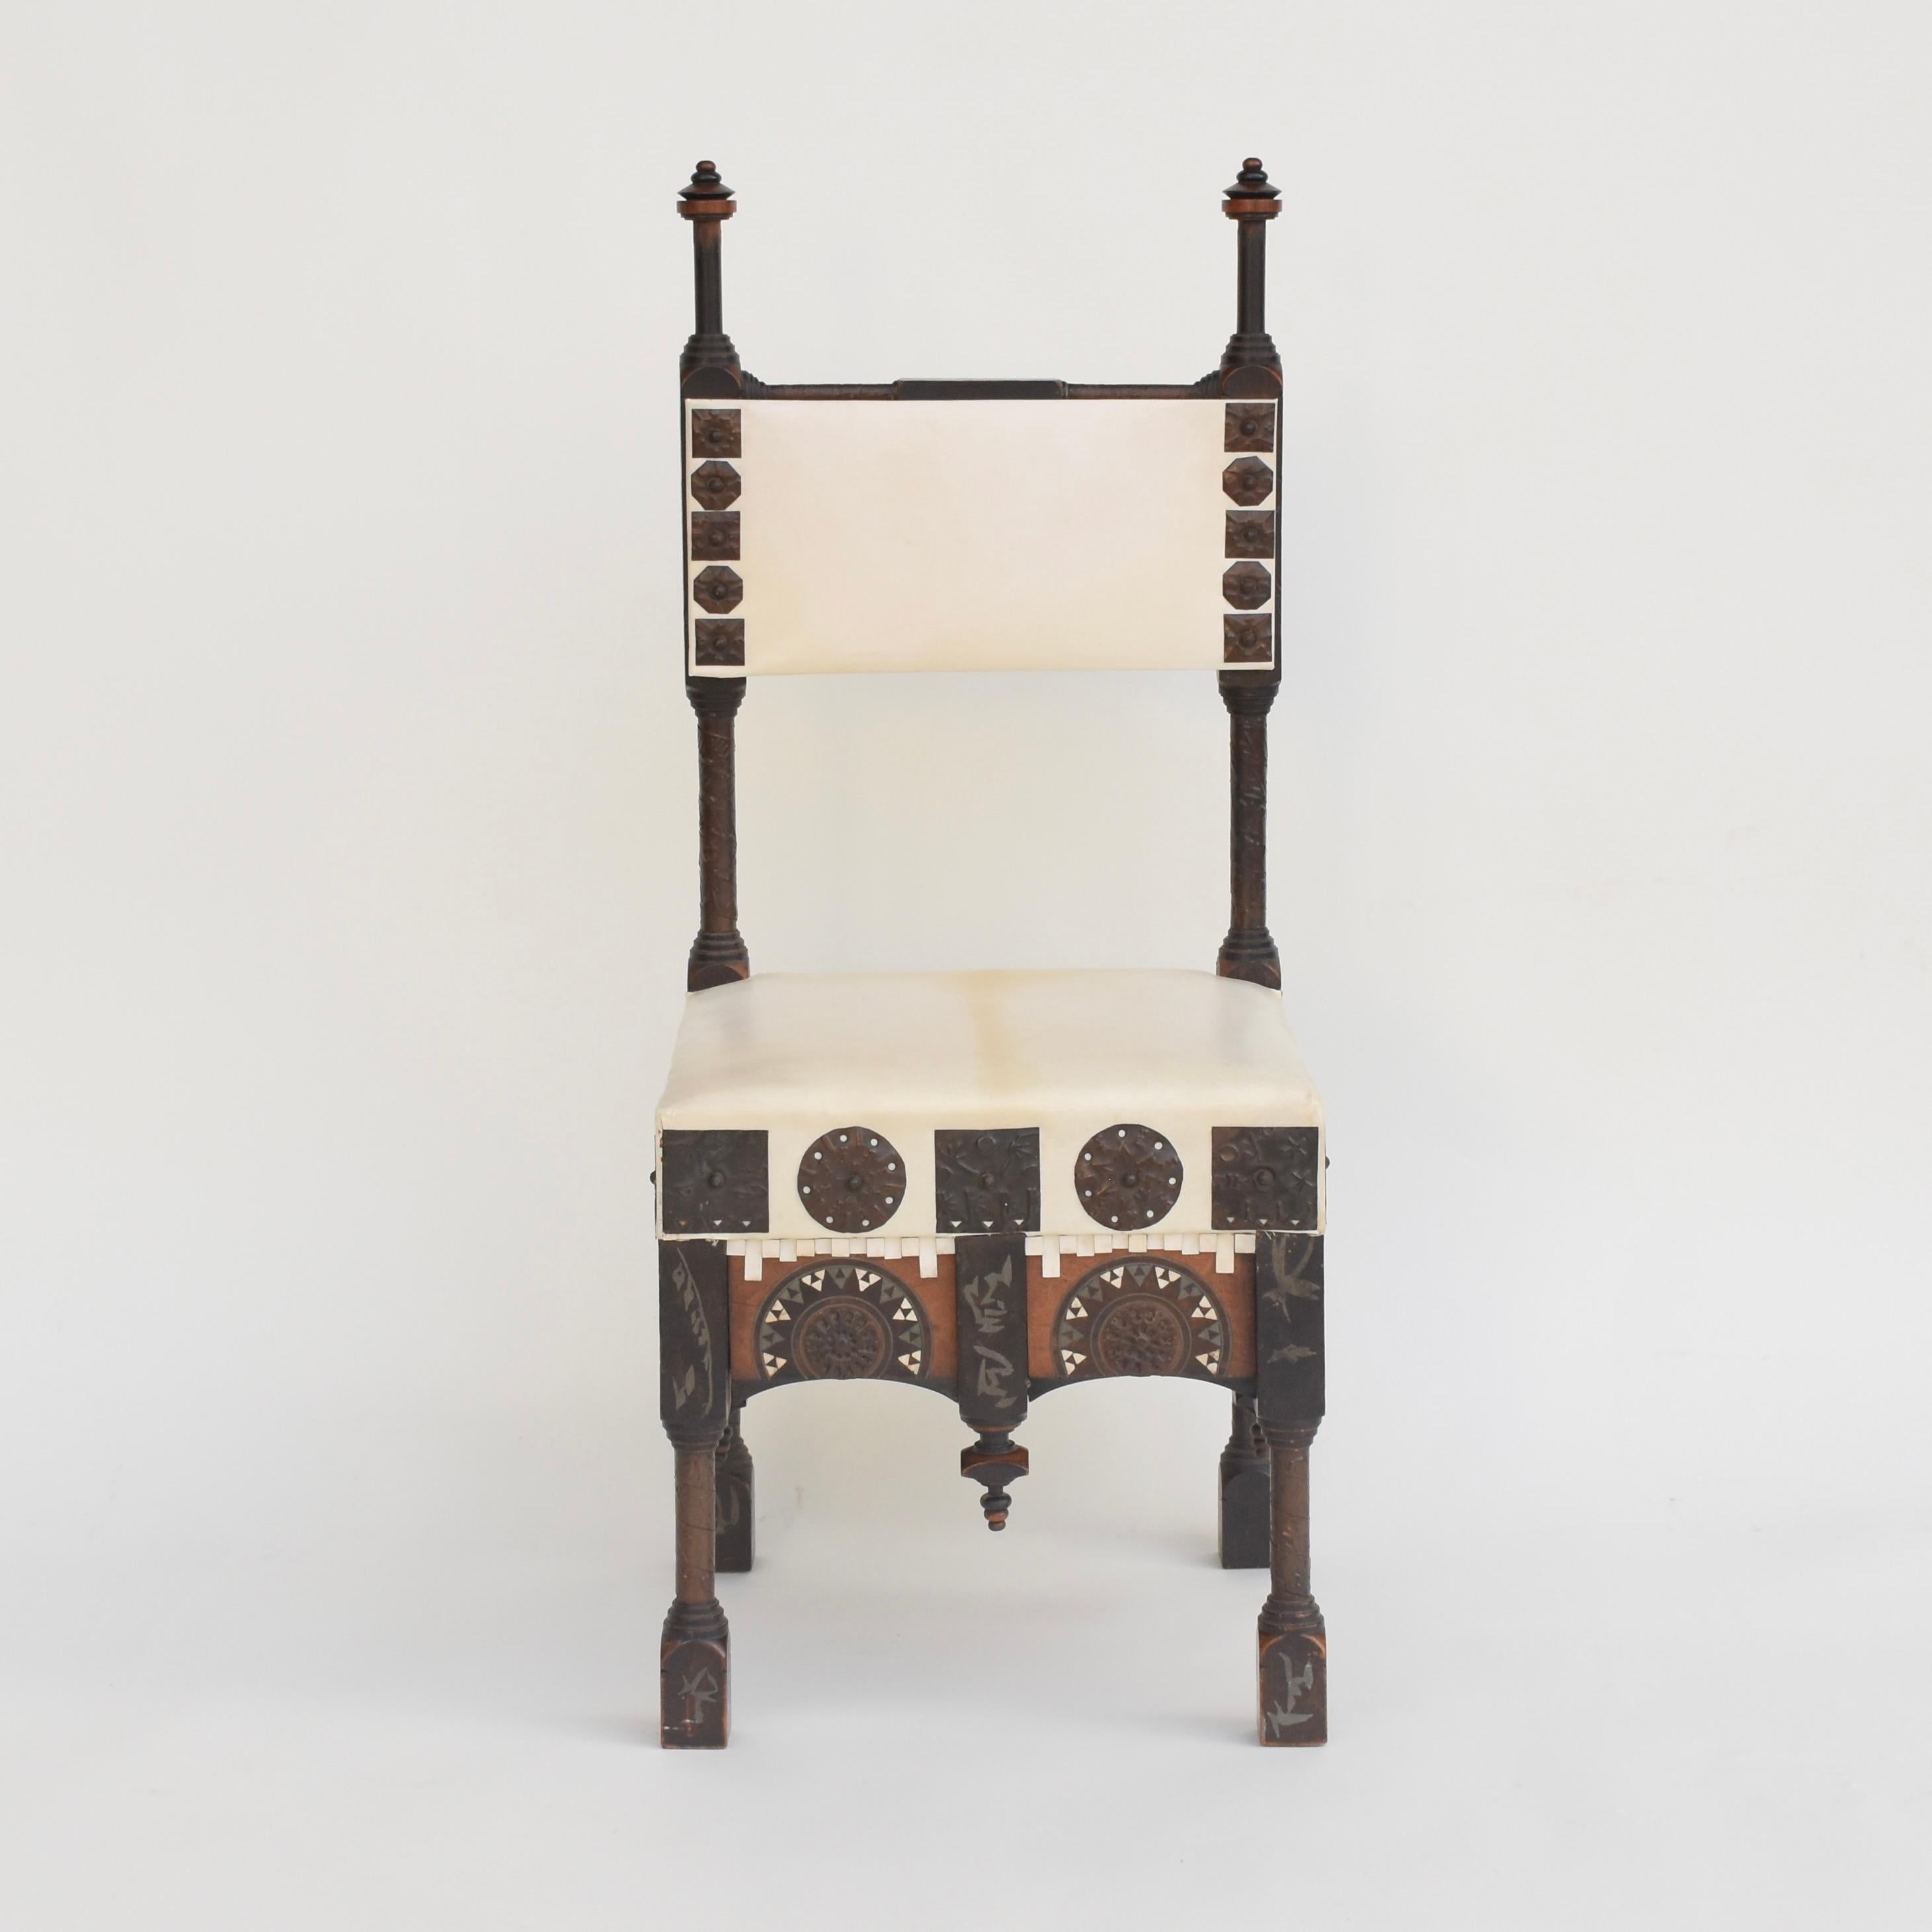 Carlo Bugatti's beautiful chair of partly ebonised wood, decorated with geometric metal and bone inlays and embossed metal decorations. Turned legs and uprights covered with copper ribbons. Seat and back upholstered with vellum. This example made